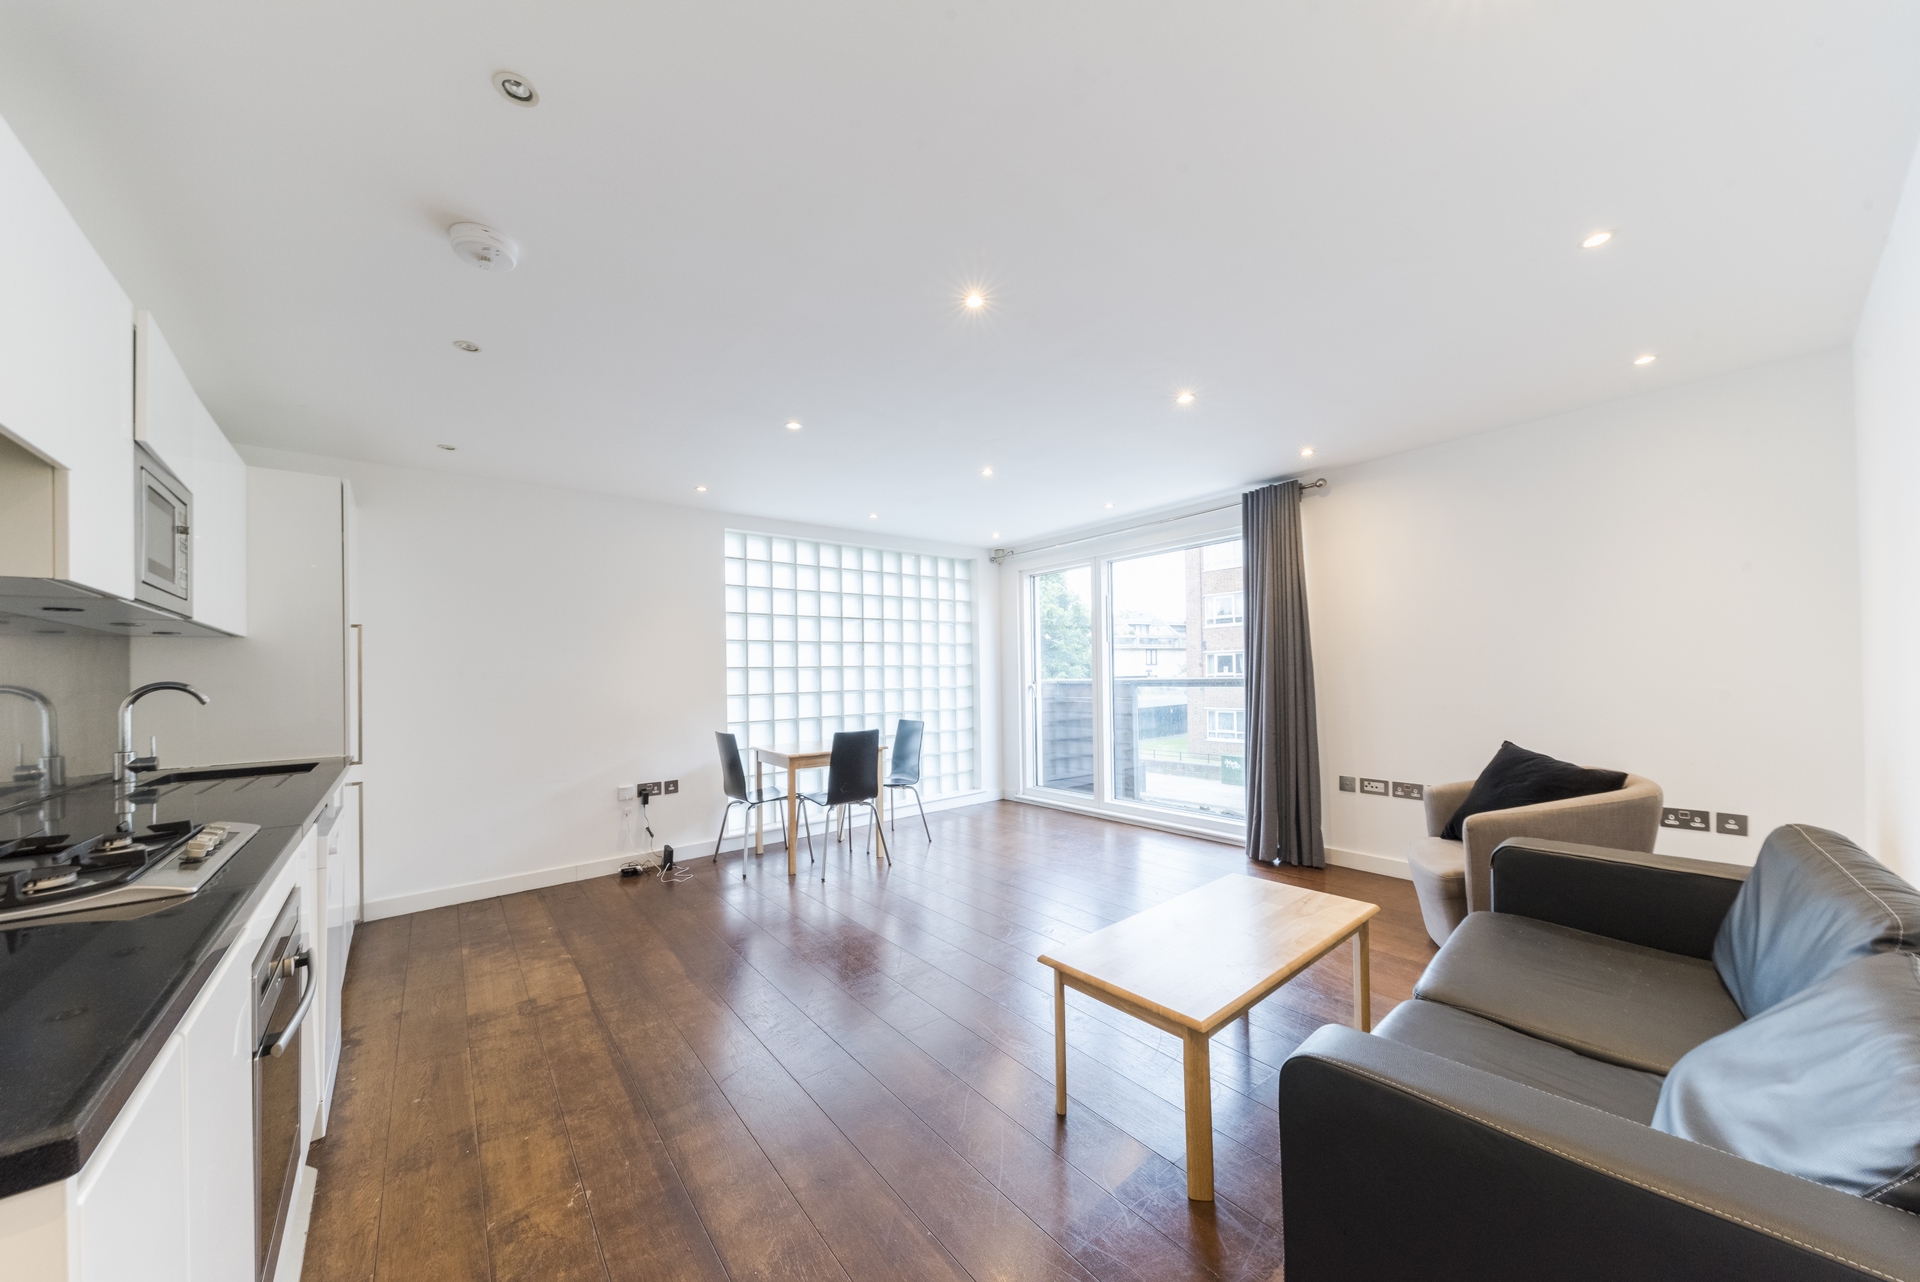 3 Bedroom Flat to rent in St John's Wood, London, NW8